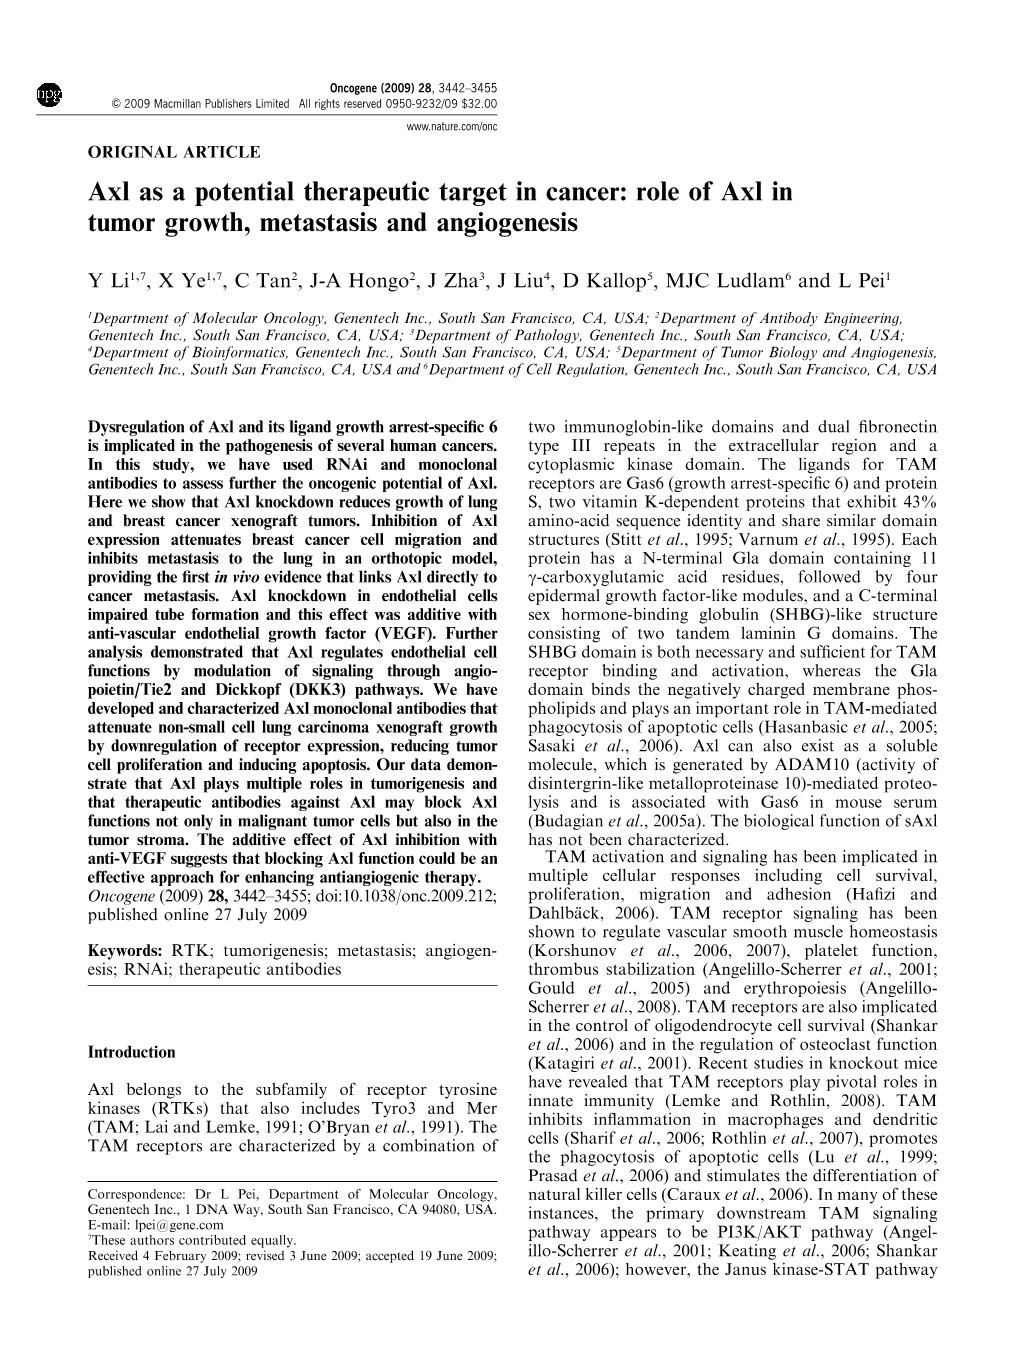 Role of Axl in Tumor Growth, Metastasis and Angiogenesis